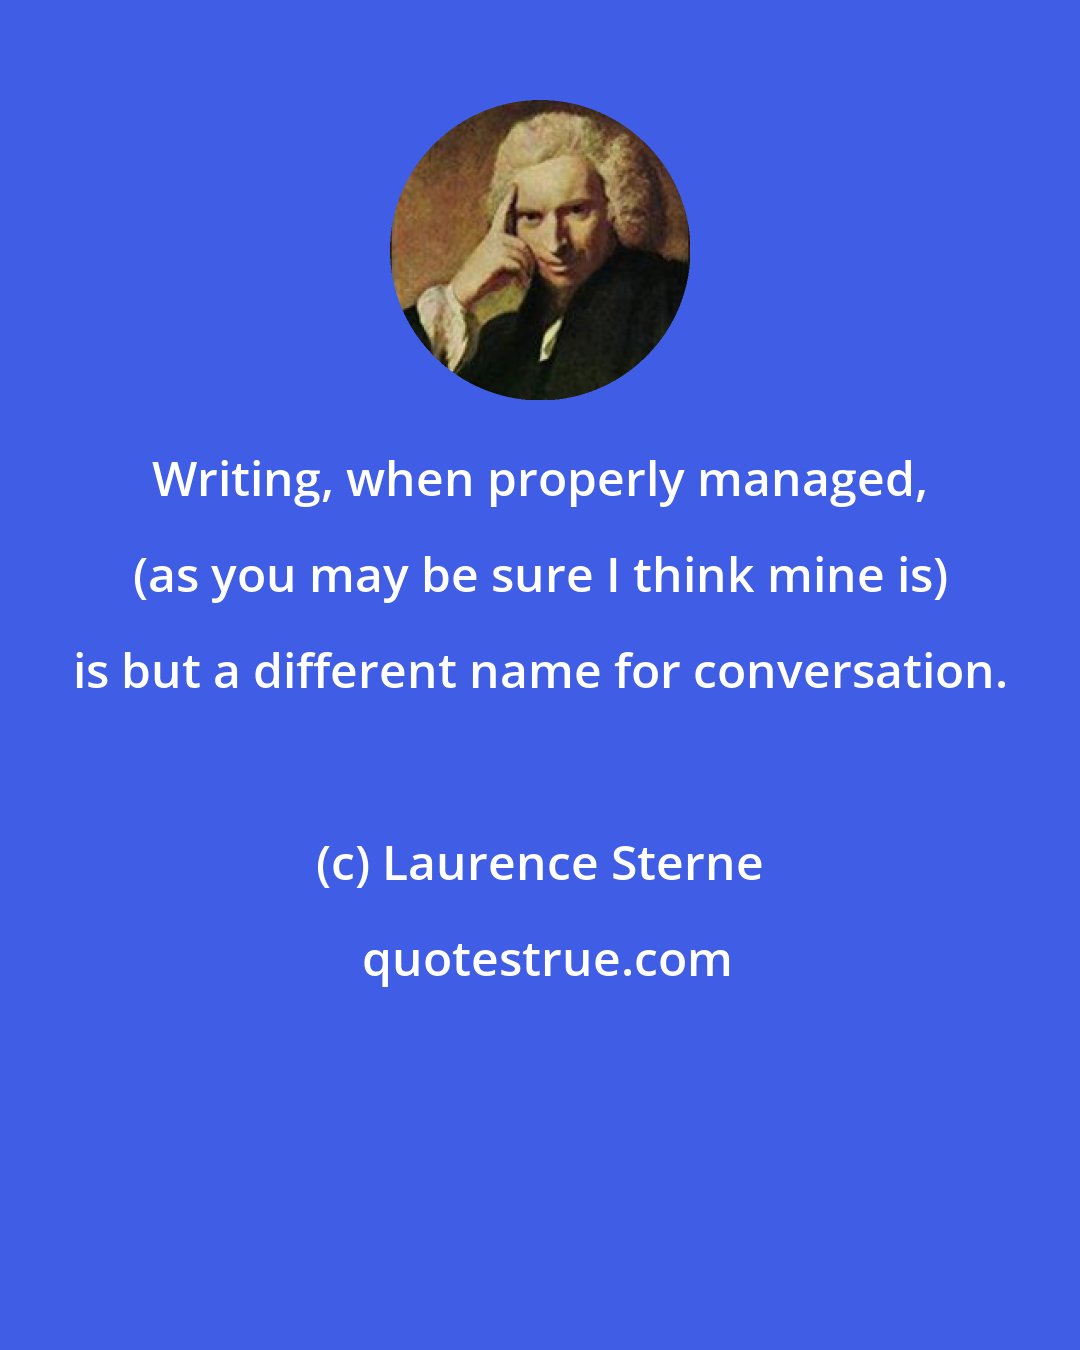 Laurence Sterne: Writing, when properly managed, (as you may be sure I think mine is) is but a different name for conversation.